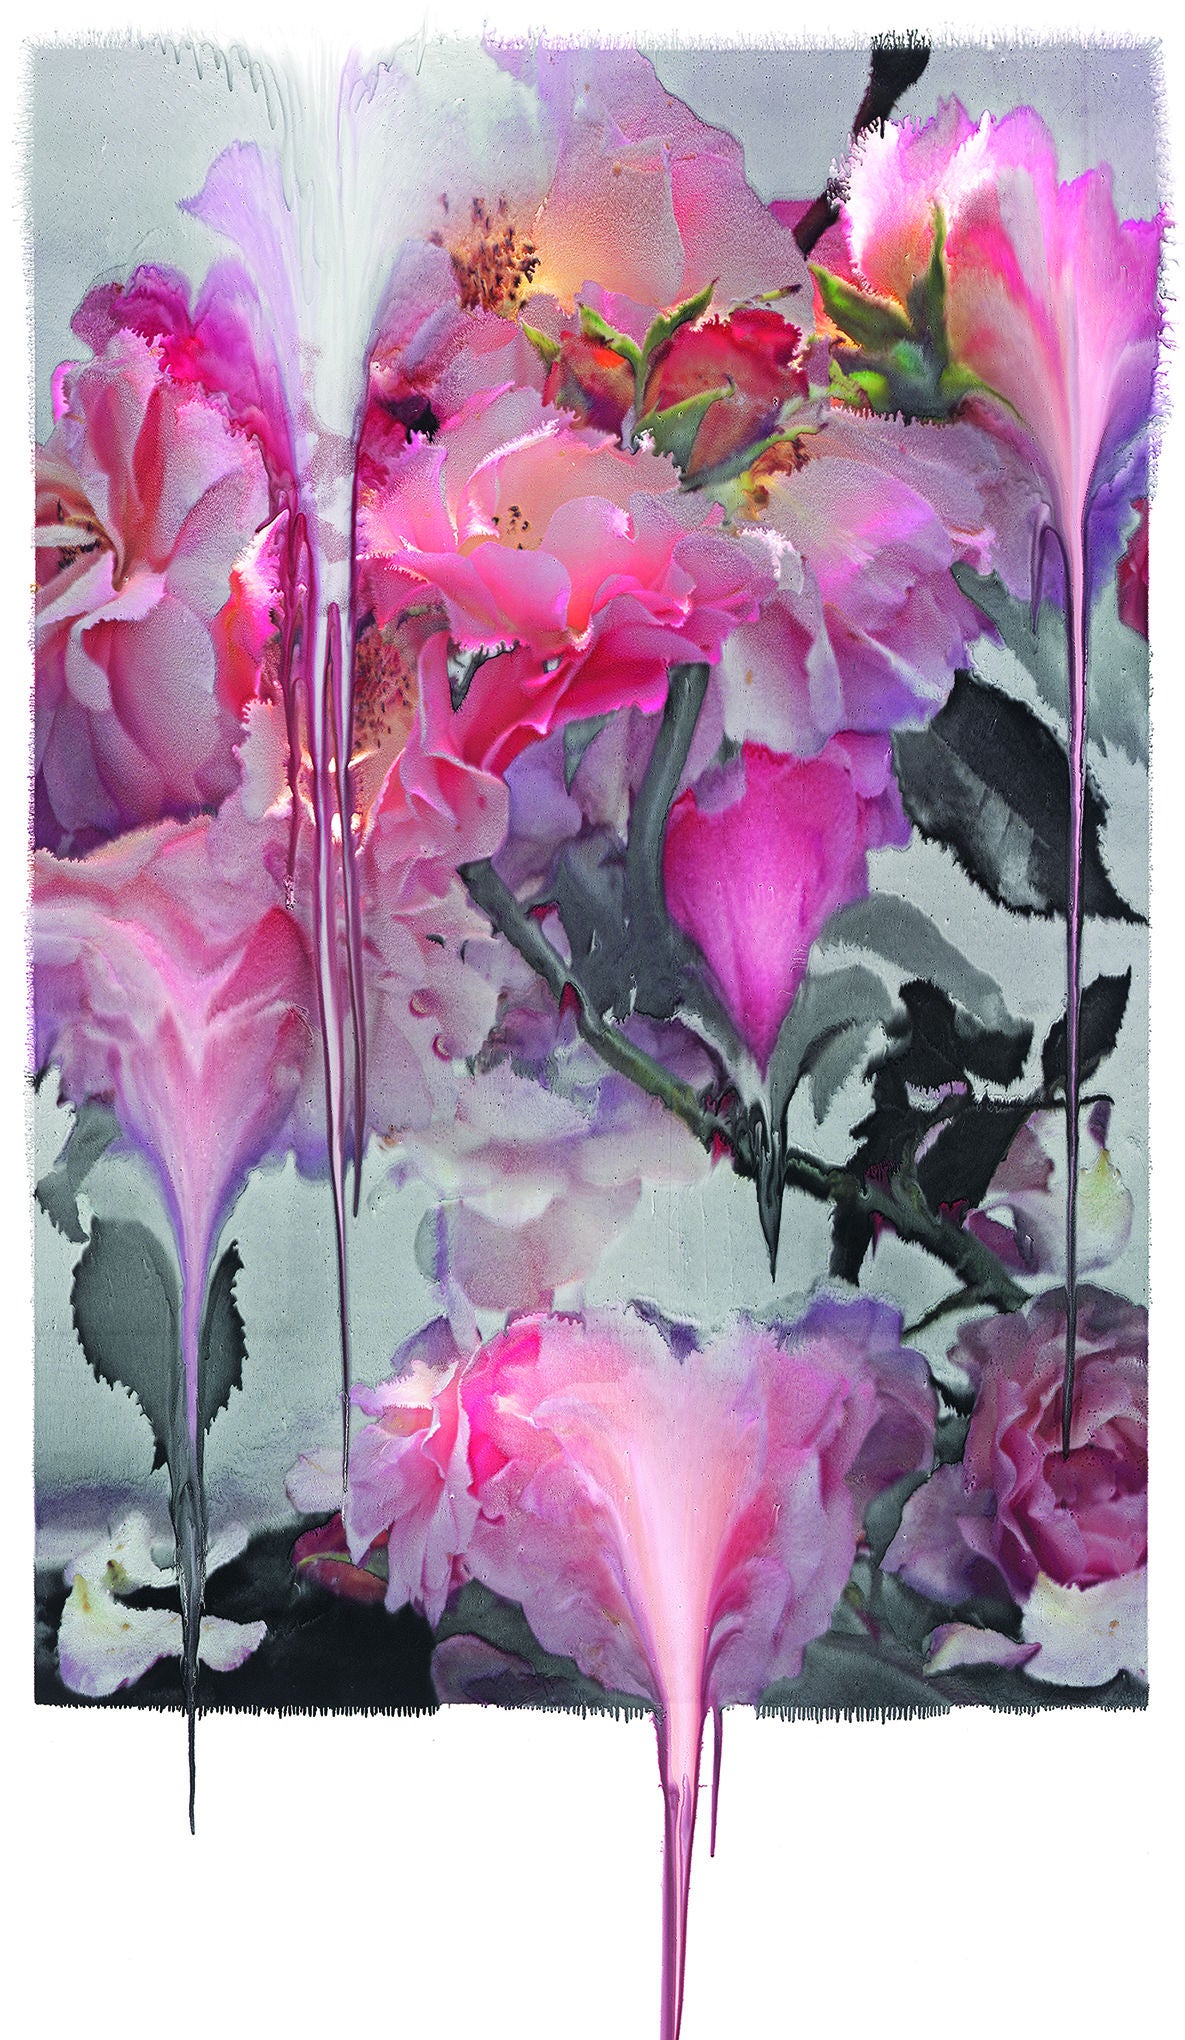 Nick Knight Dripping Roses to be shown at the exhibition